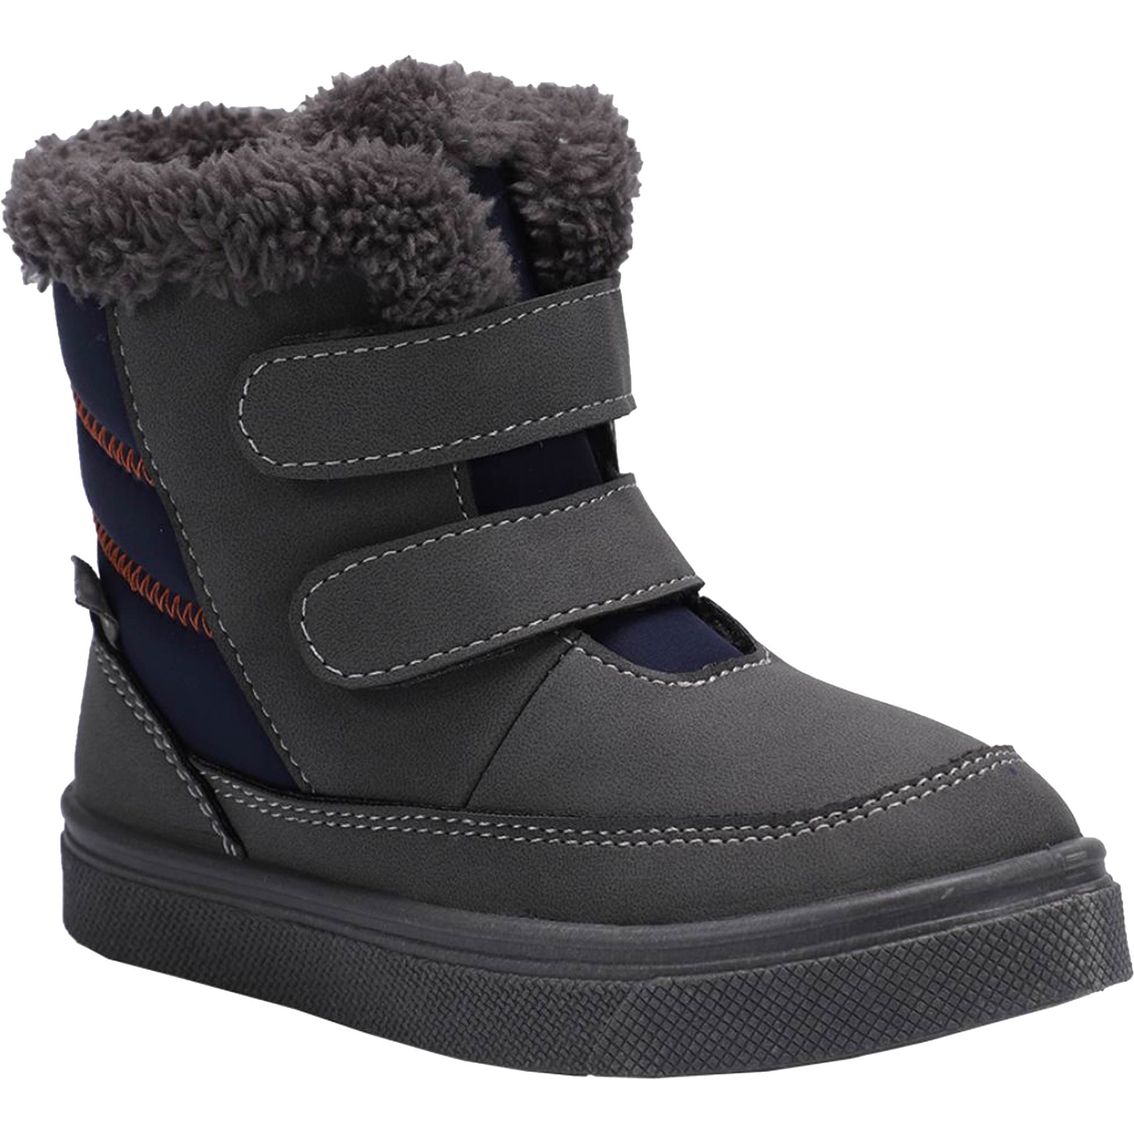 Oomphies Toddler Boys Charlie Boots - Image 1 of 4